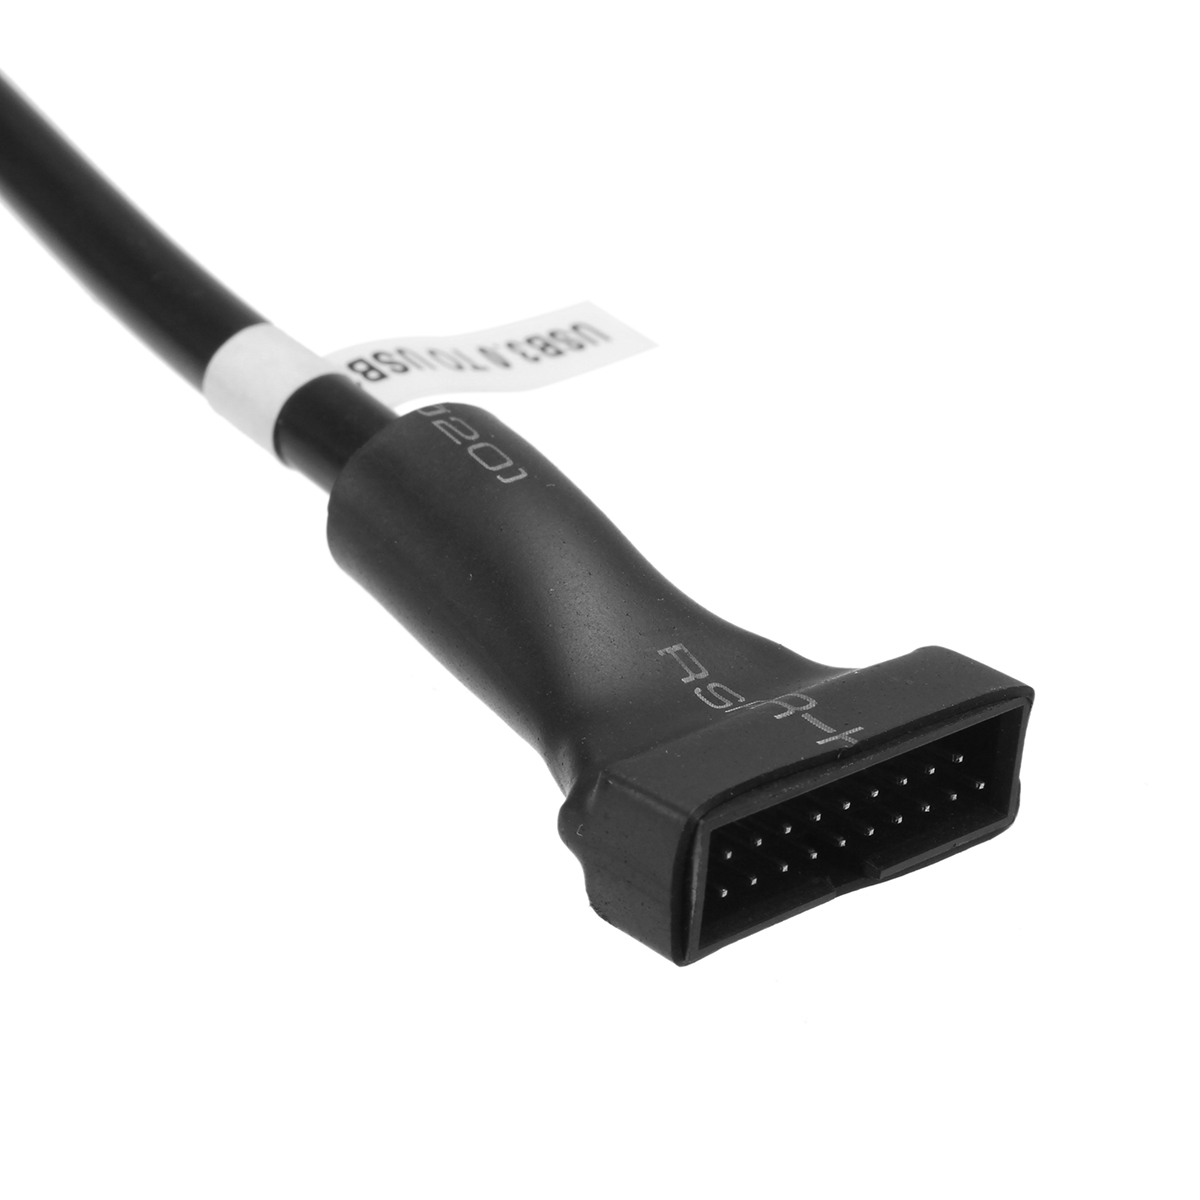 20pin-to-9pin-USB-30-to-USB-20-Cable-Adapter-1160188